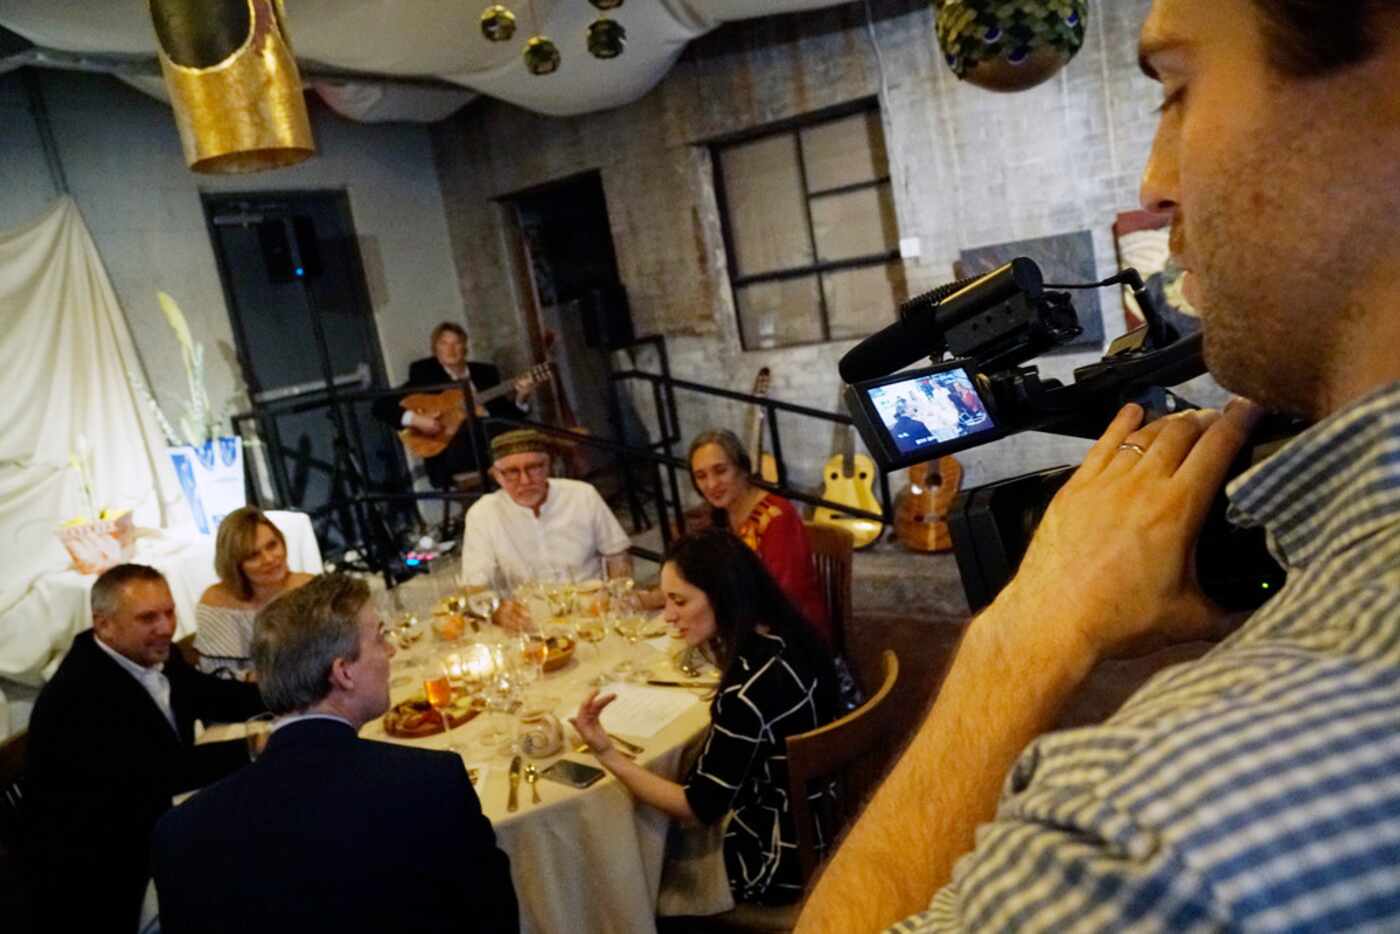 Guests enjoyed art, wine and good food during the filming of a TV pilot at Magdalena's in...